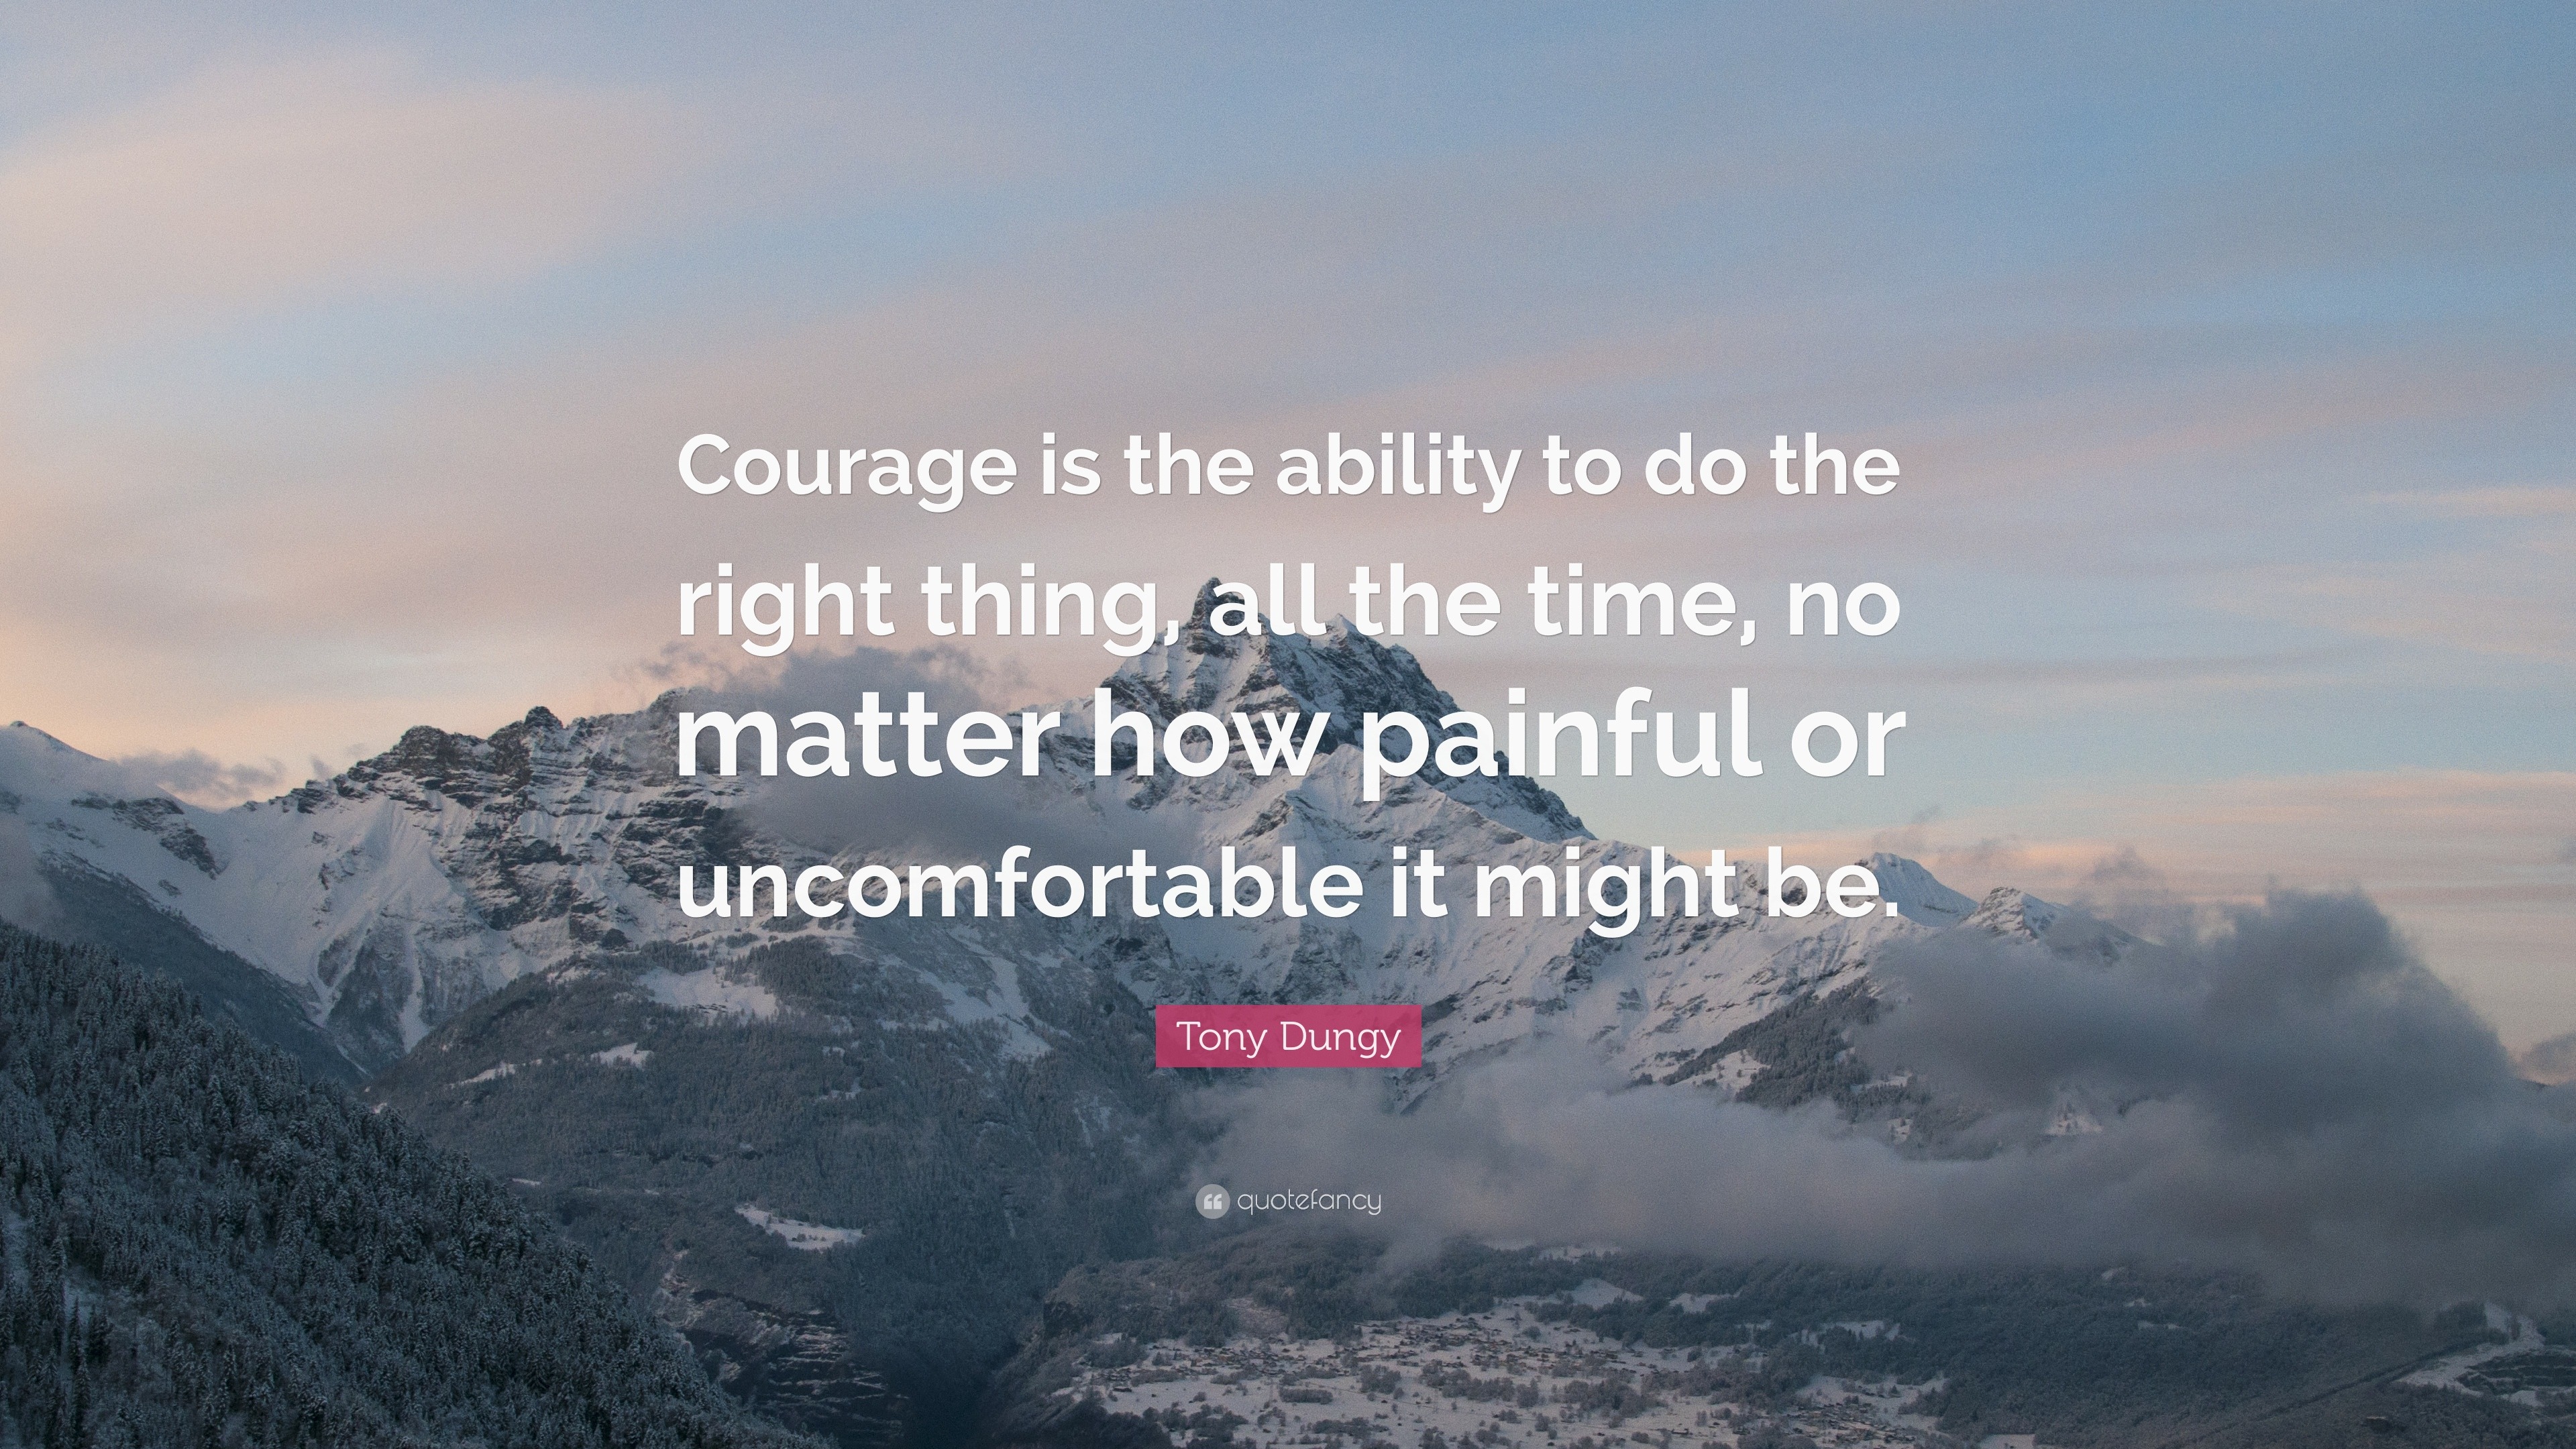 Tony Dungy Quote: “Courage is the ability to do the right thing, all ...